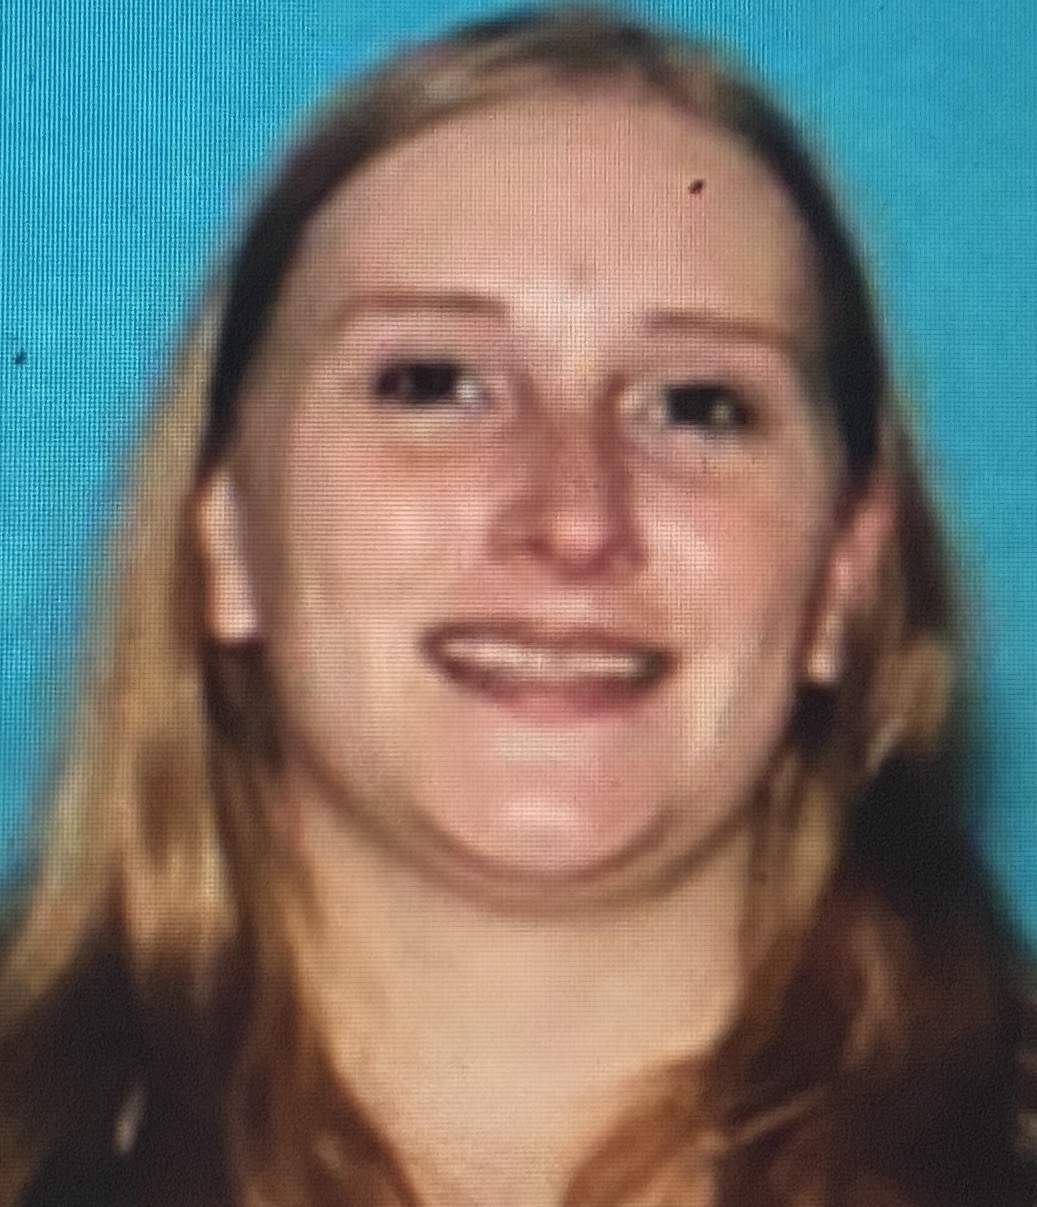 $2,500 reward offered for information on missing Michigan mother